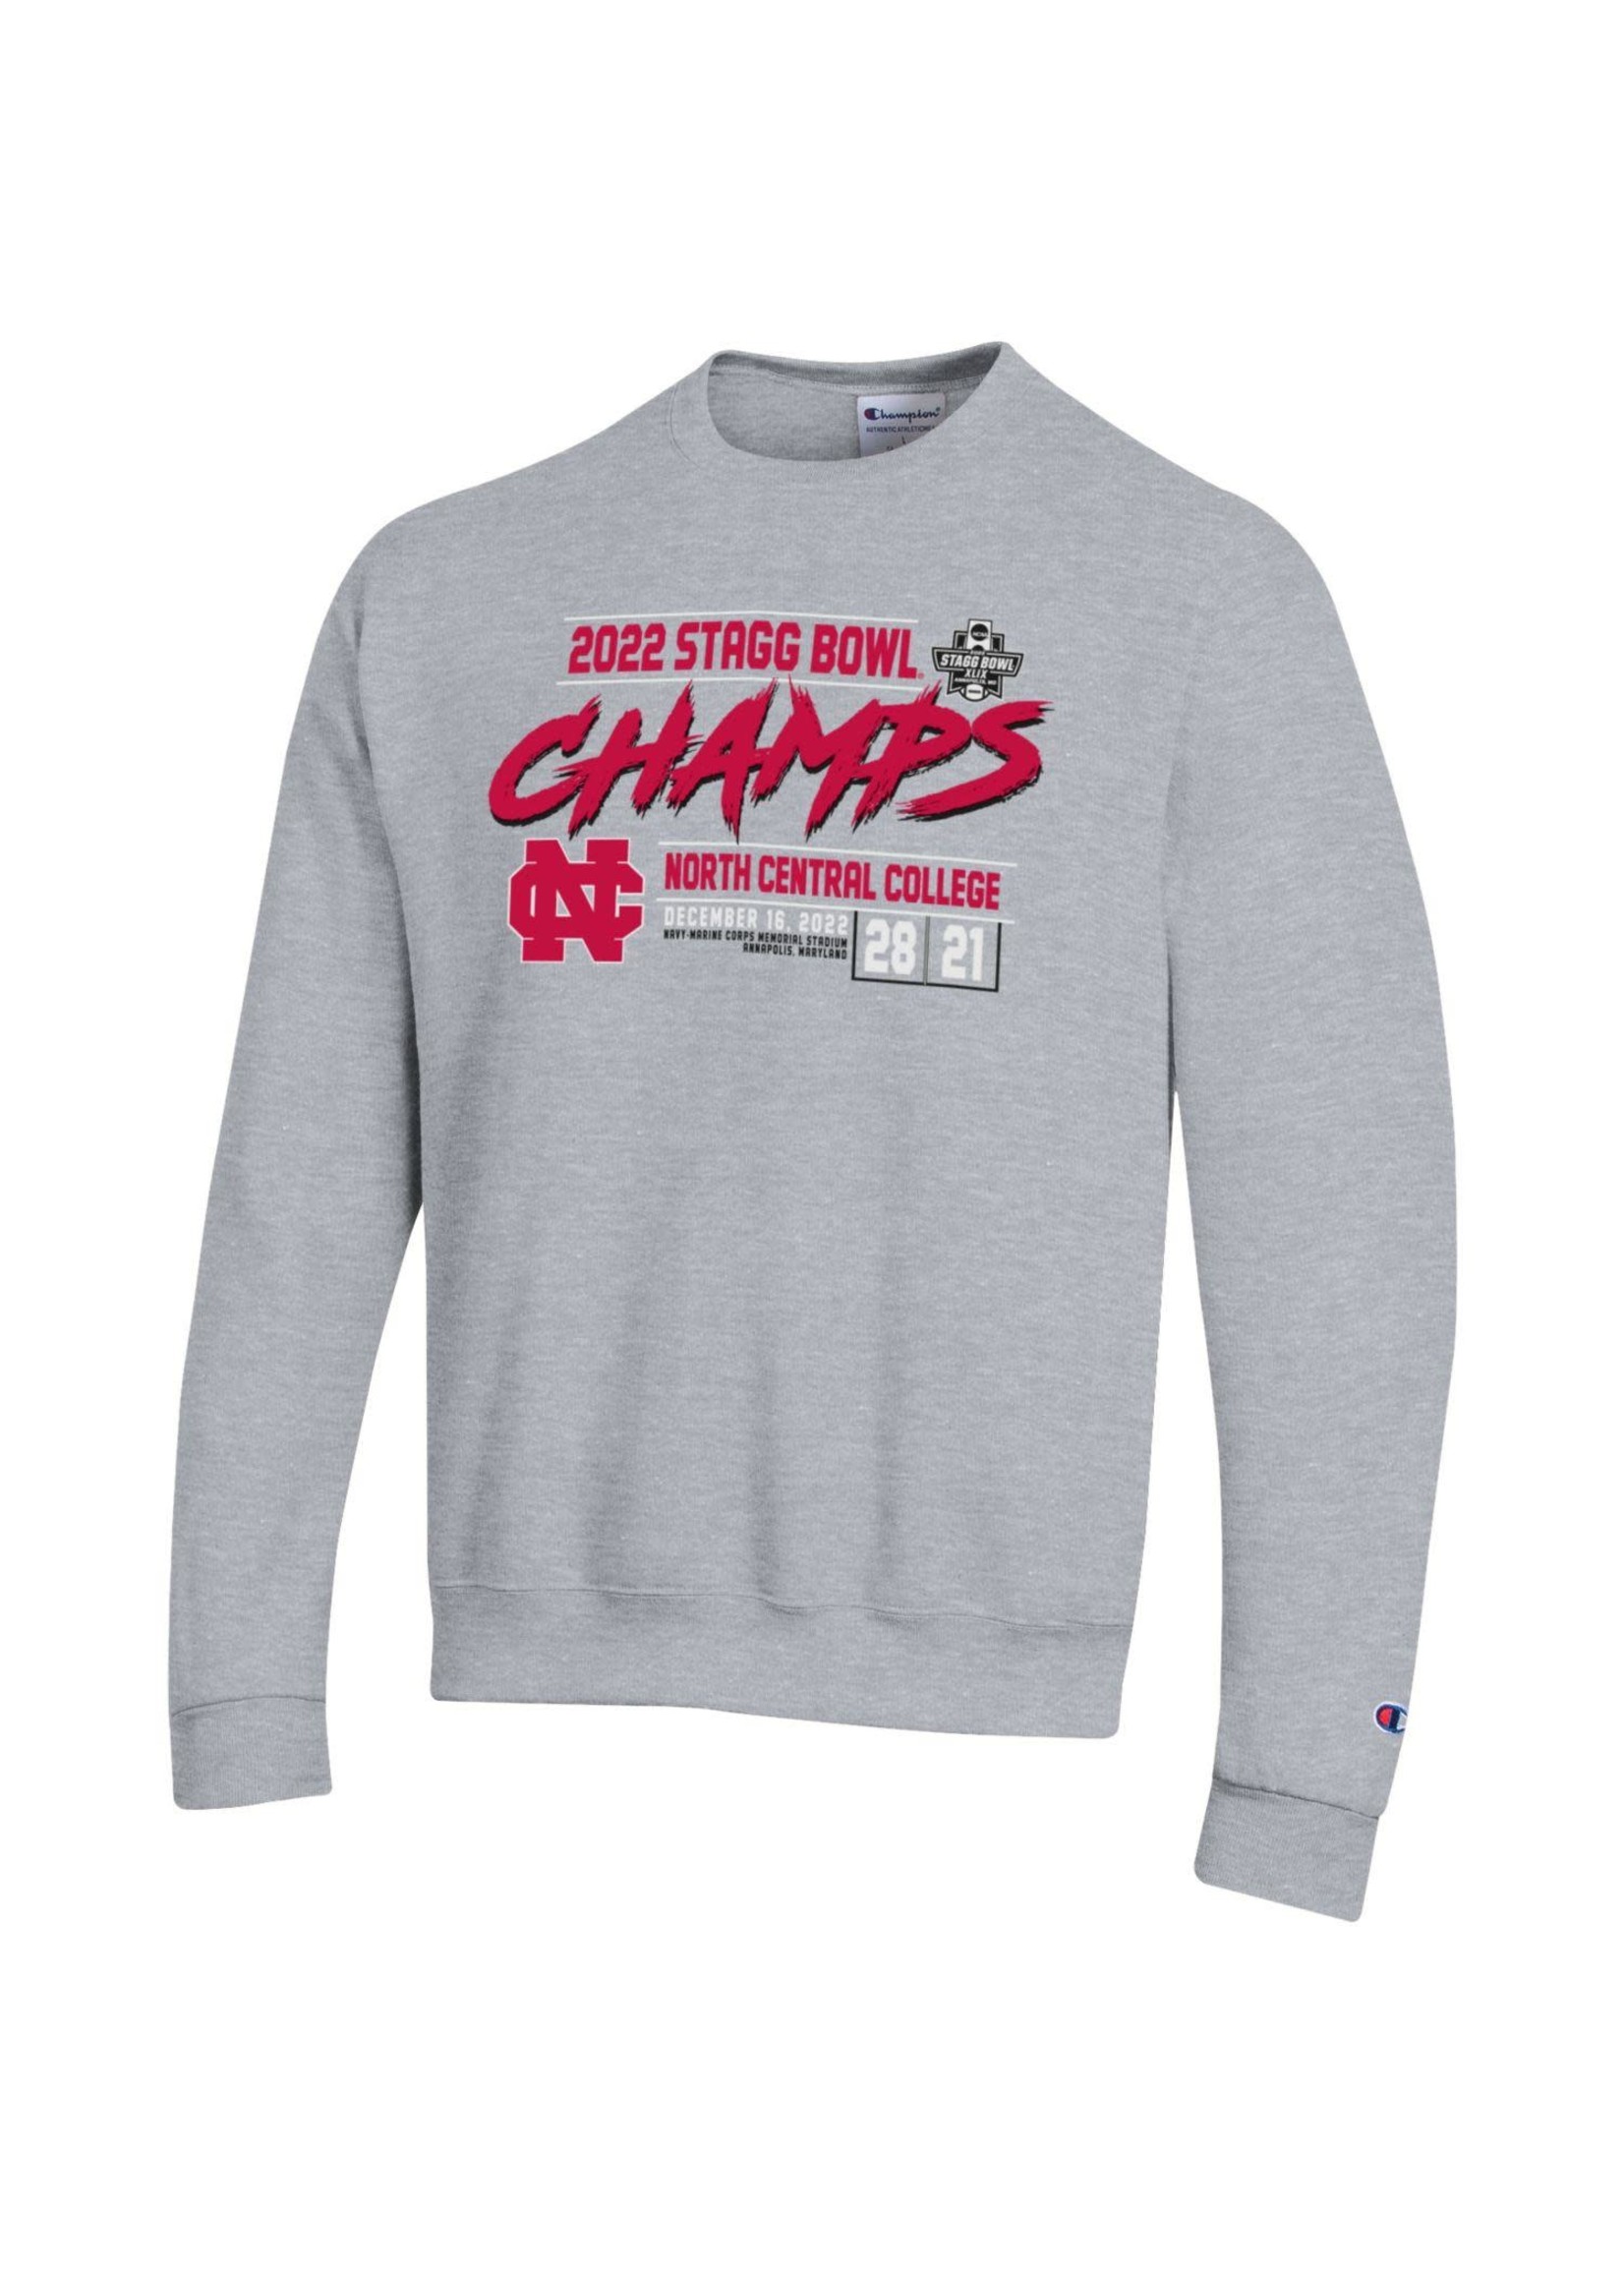 2022 Stagg Central College Bowl - Champion Crew Store Campus by North